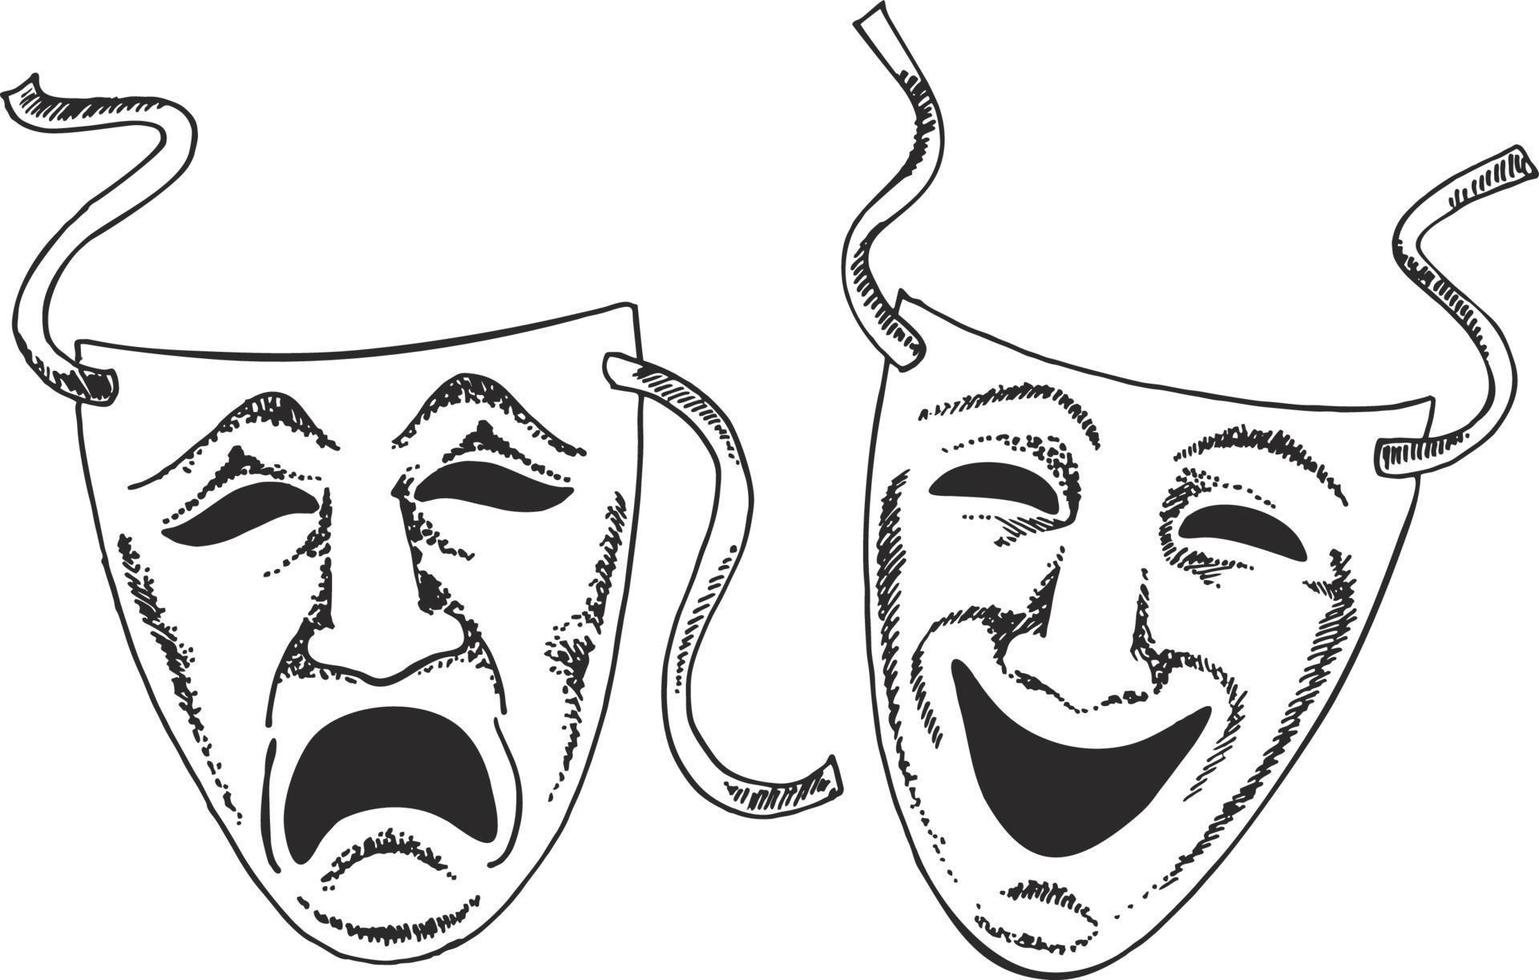 Sketch style drama or theater masks illustration in vector format